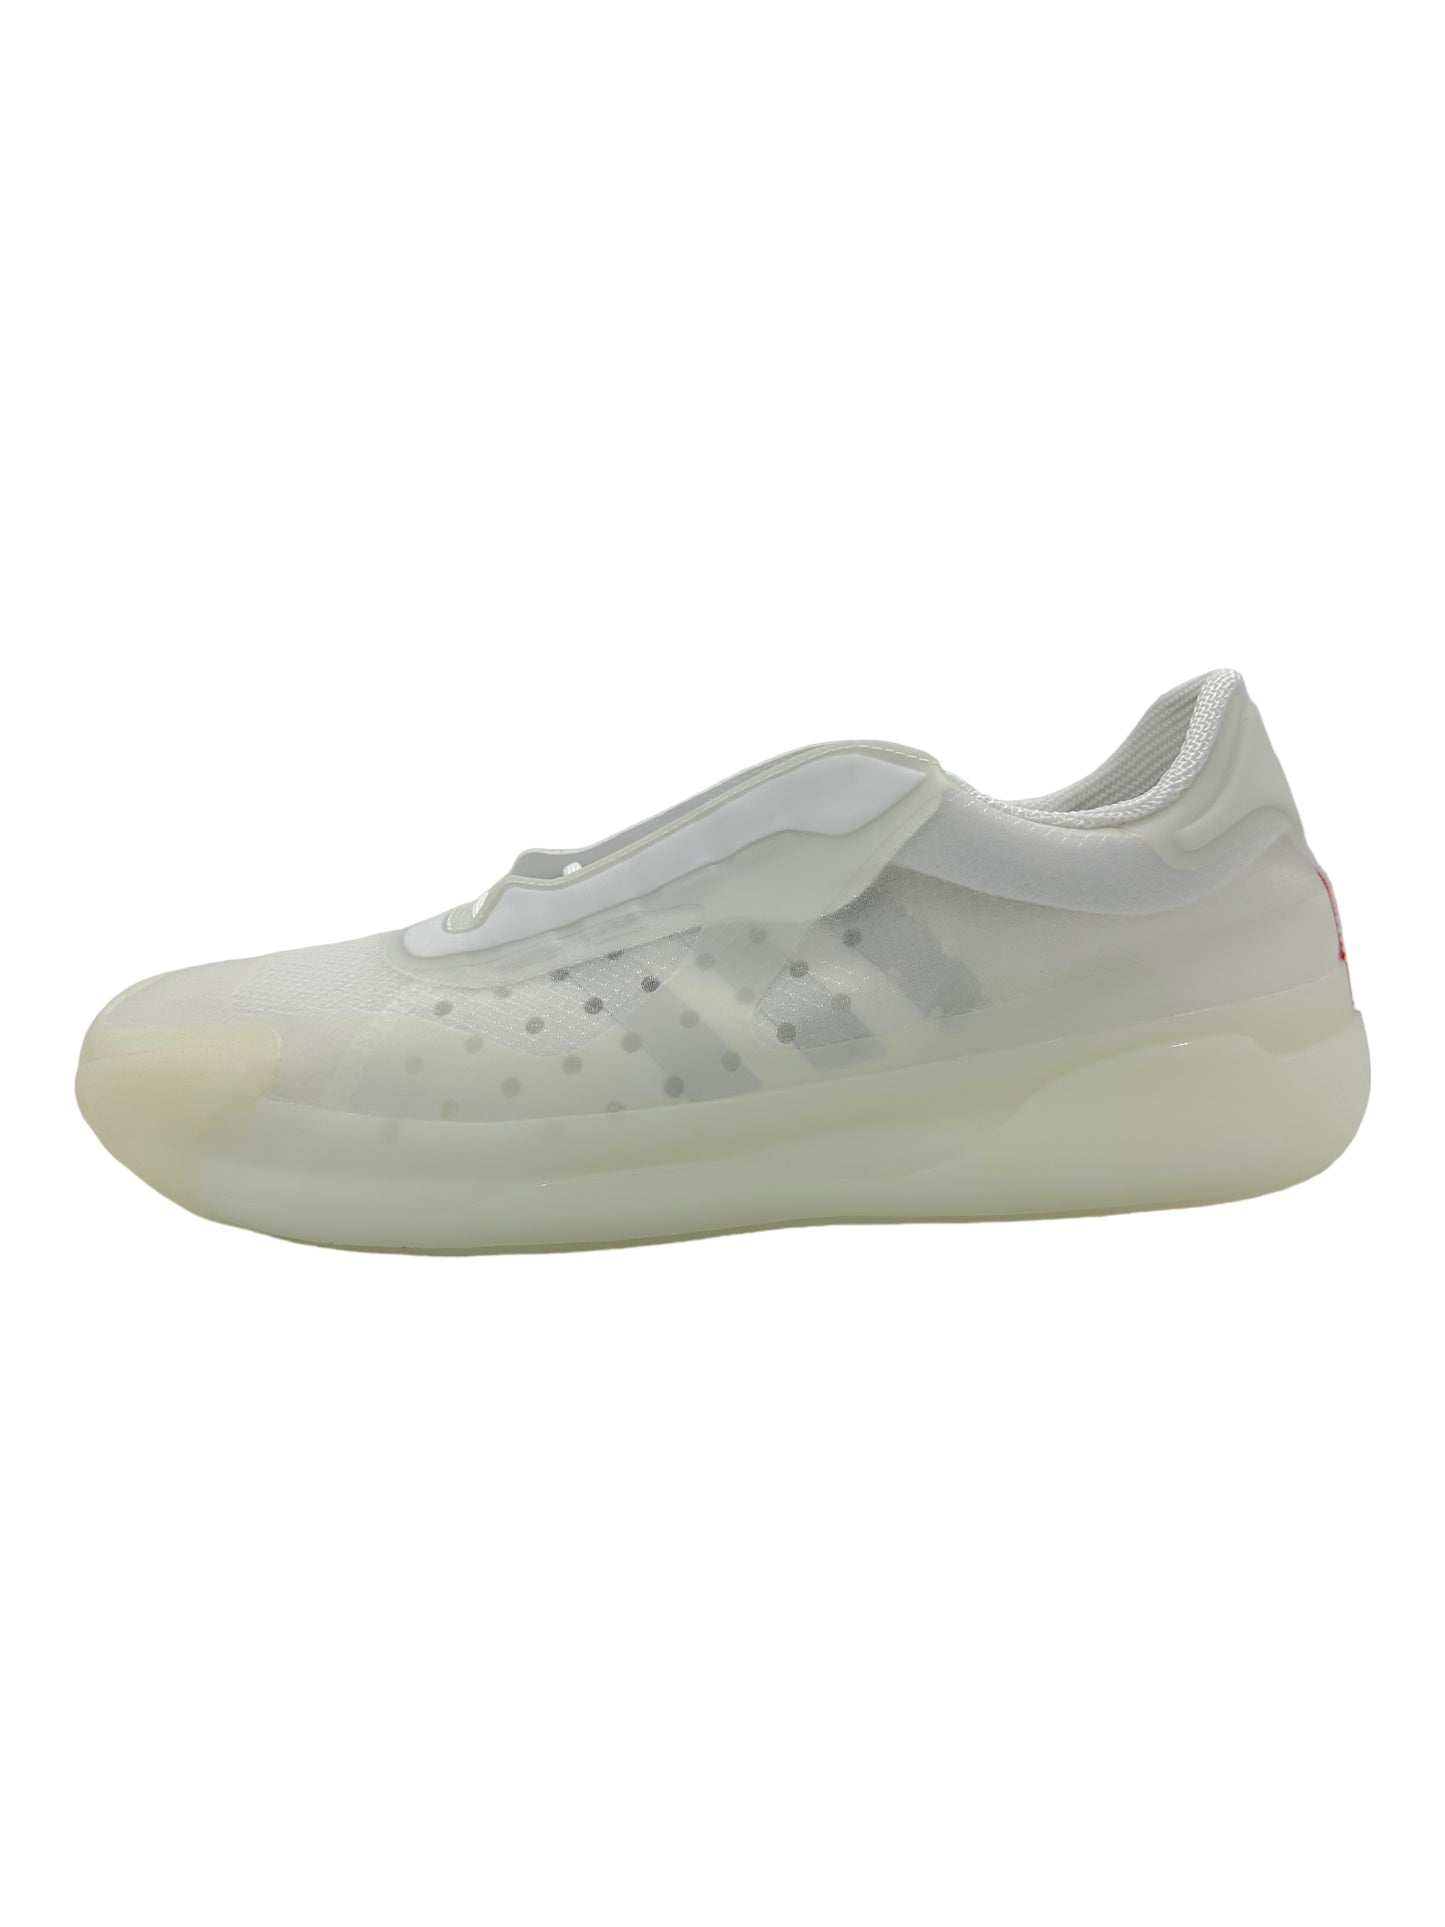 Adidas Prada X A+P Luna Rossa 21 'Cloud White' Sneakers - Genuine Design Luxury Consignment for Men. New & Pre-Owned Clothing, Shoes, & Accessories. Calgary, Canada